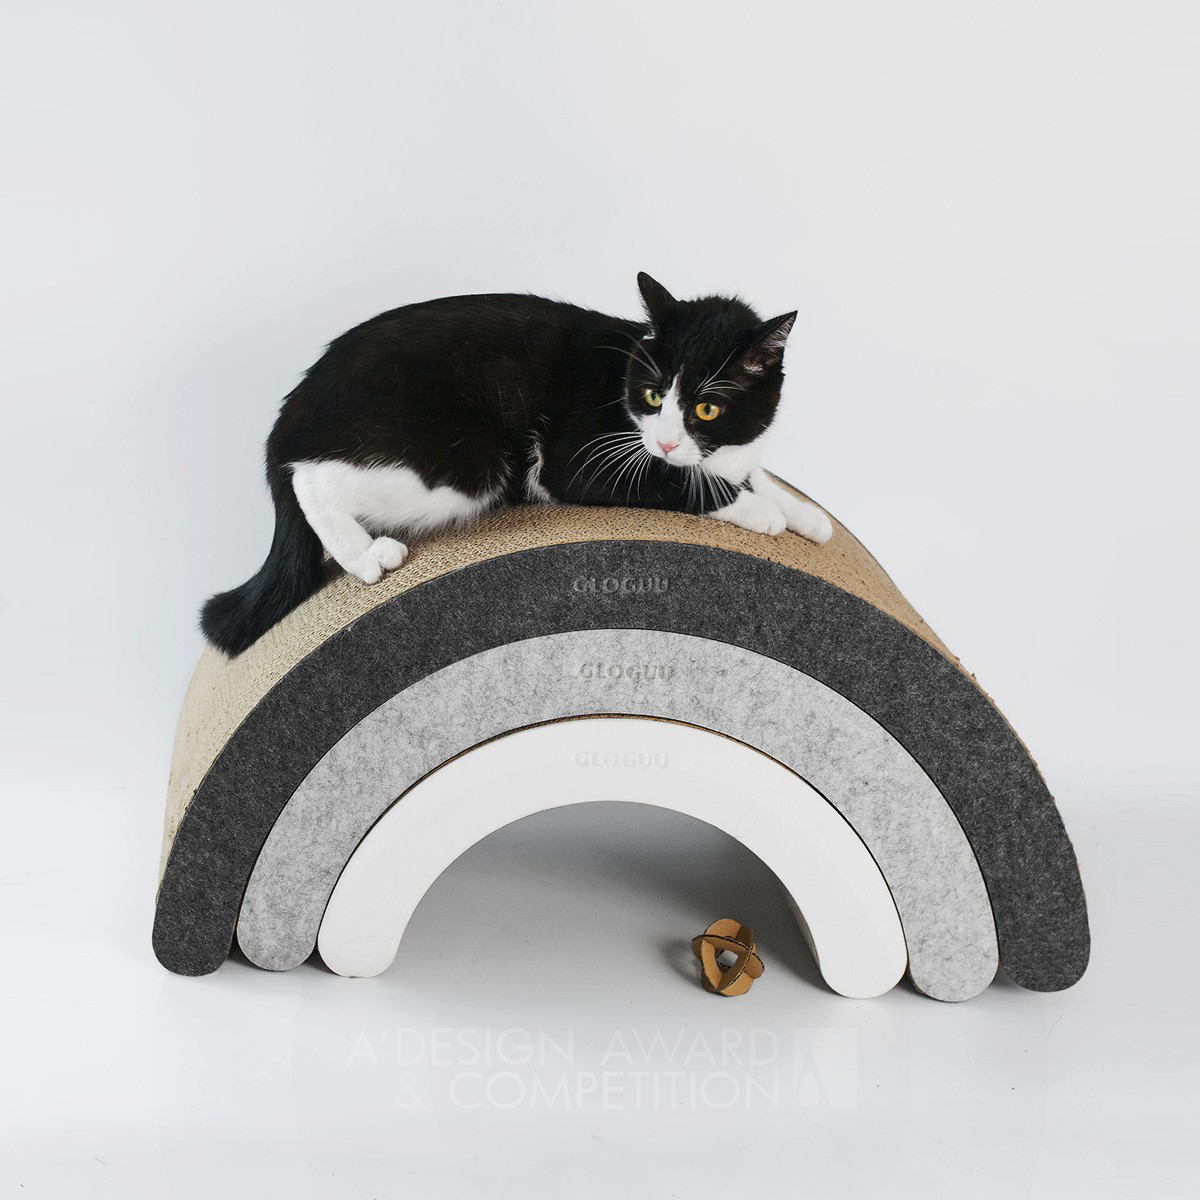 Scratch Cave Cat Scratcher by Gloguu Golden Pet Care, Toys, Supplies and Products for Animals Design Award Winner 2022 